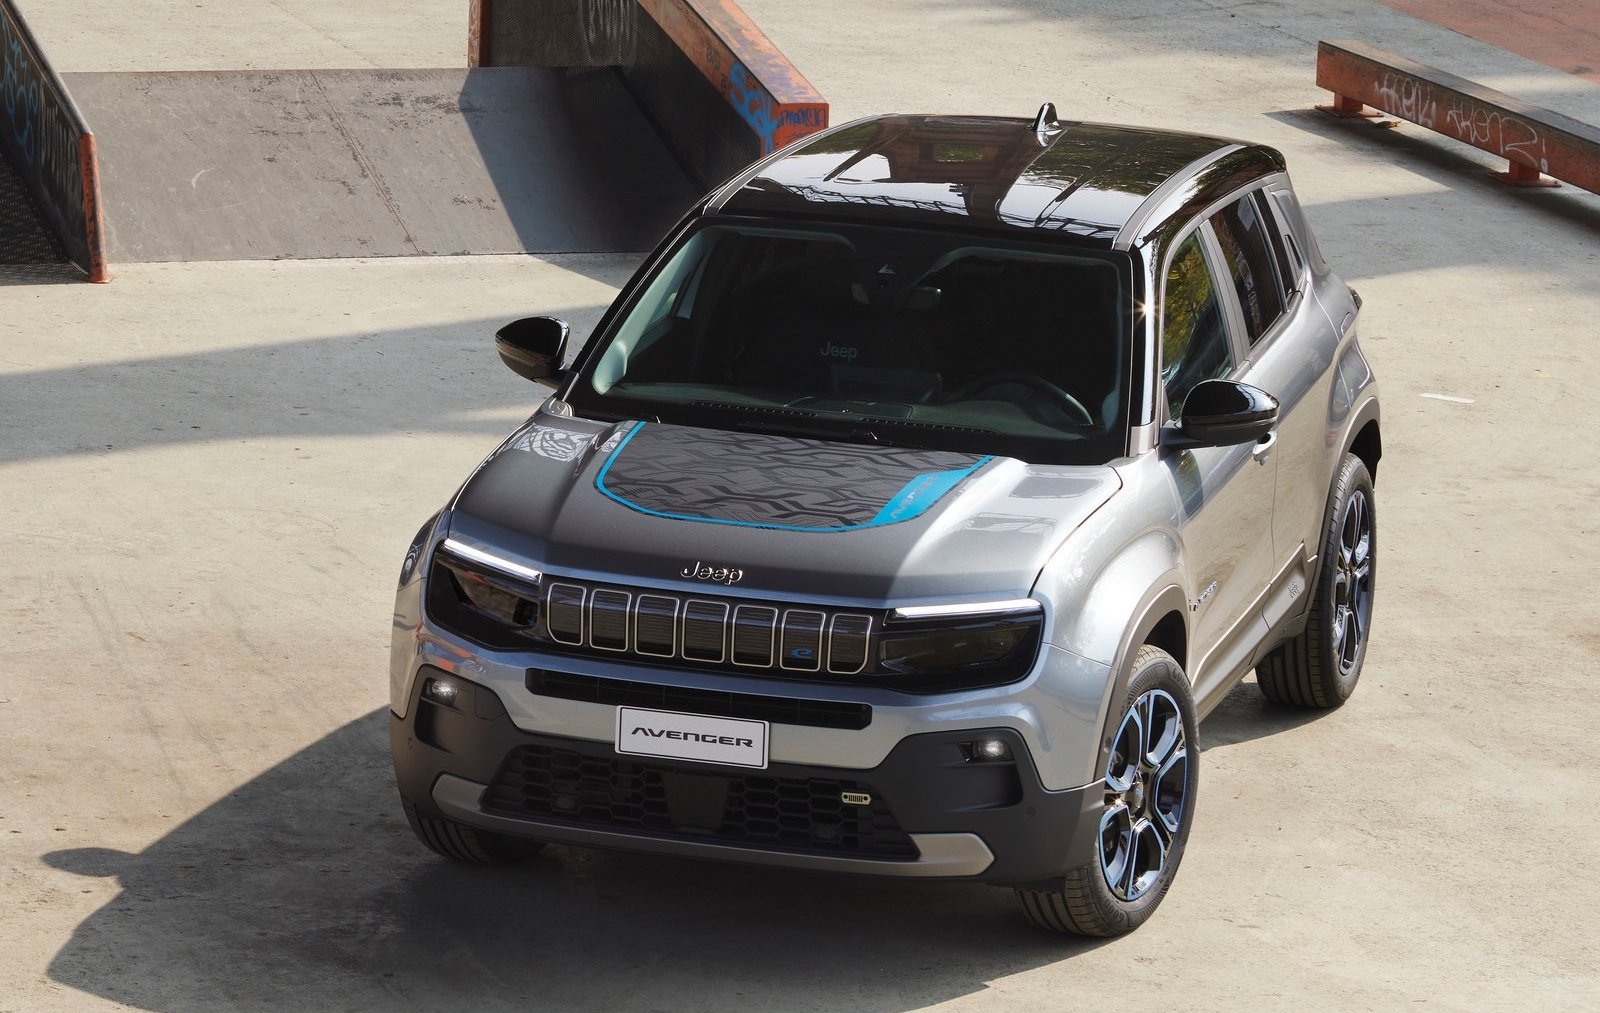 Jeep unveils fully-electric Avenger SUV at Paris Motor Show